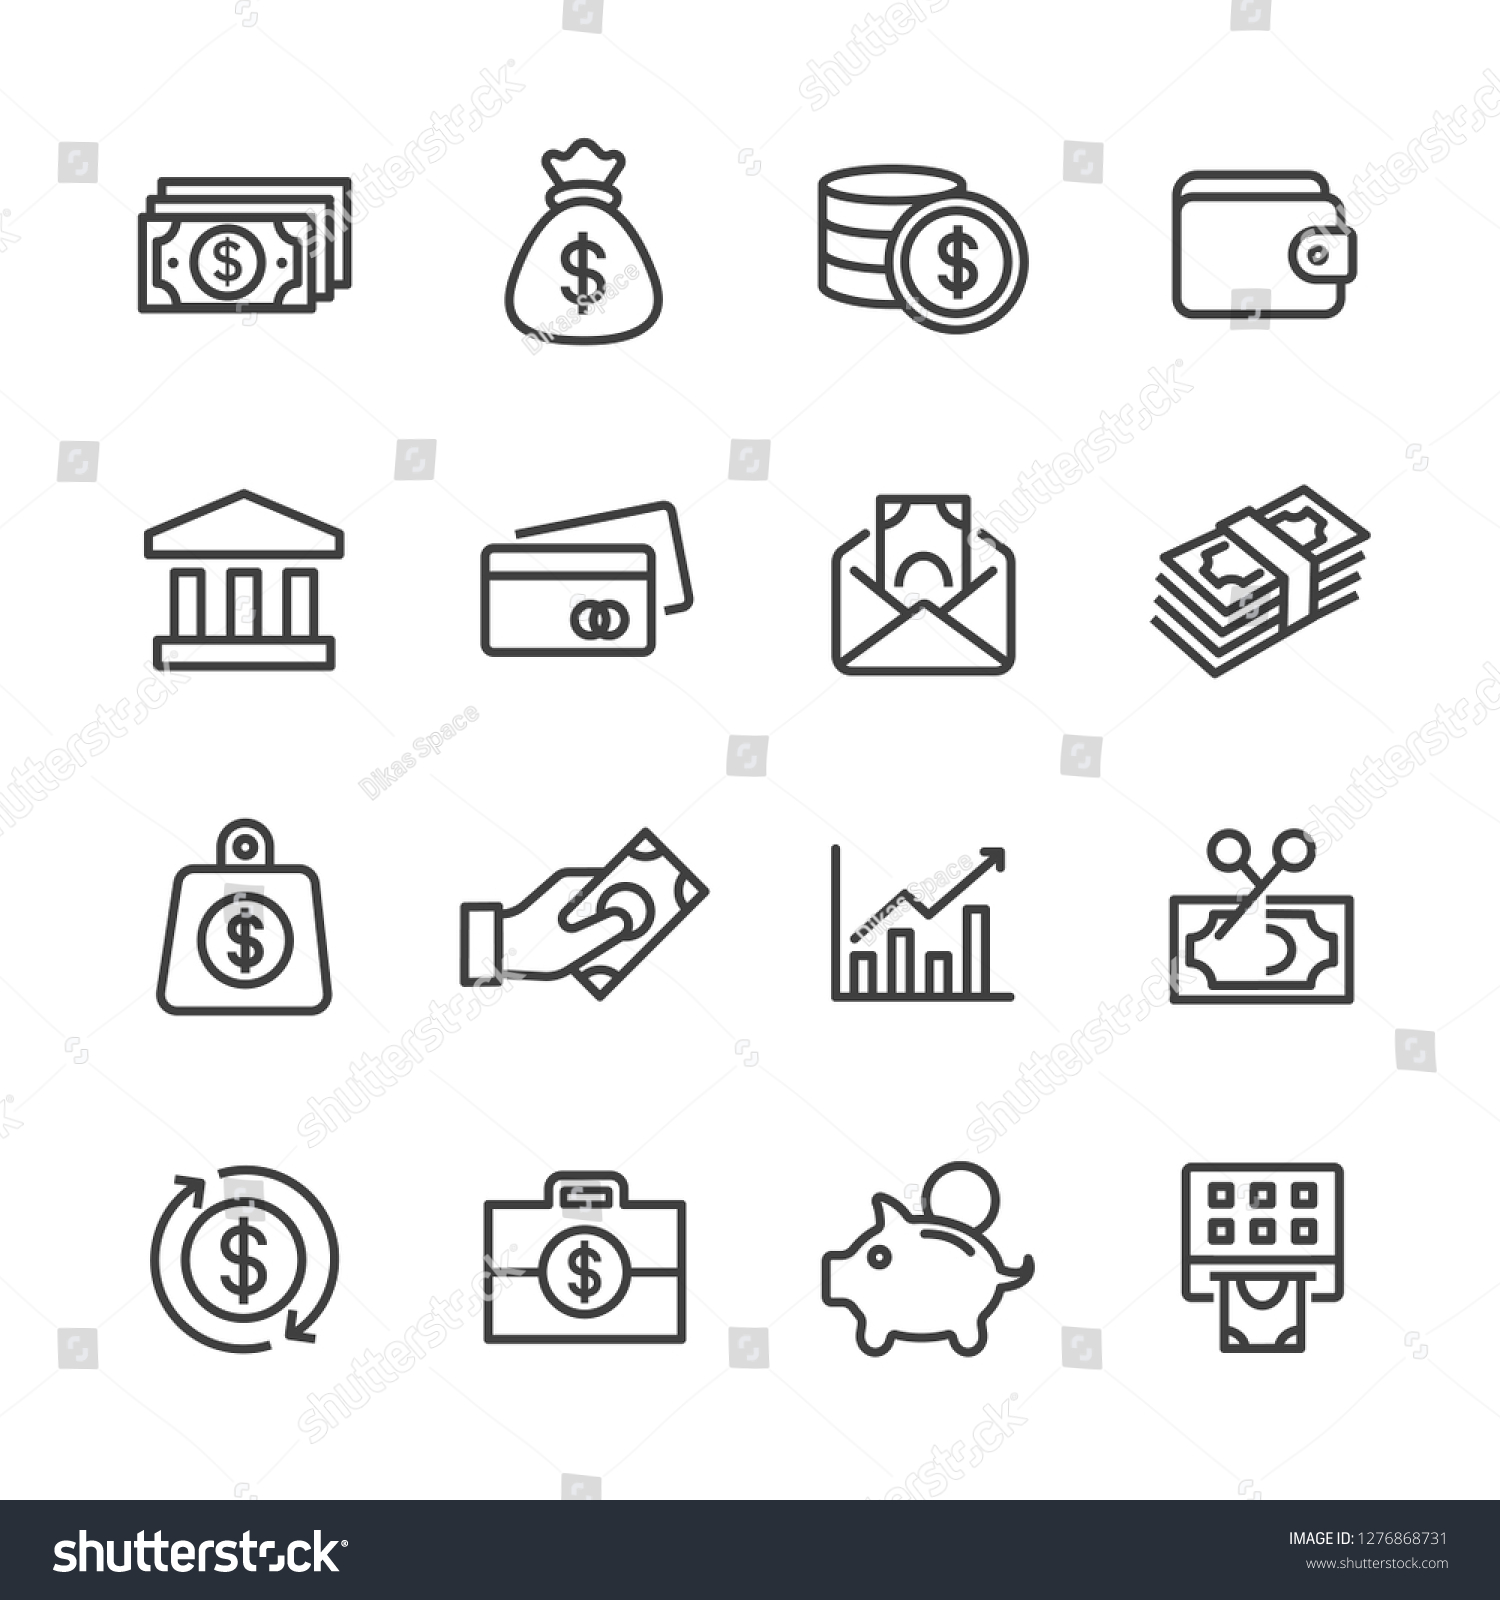 Money and finance related lines icon set vector images #1276868731